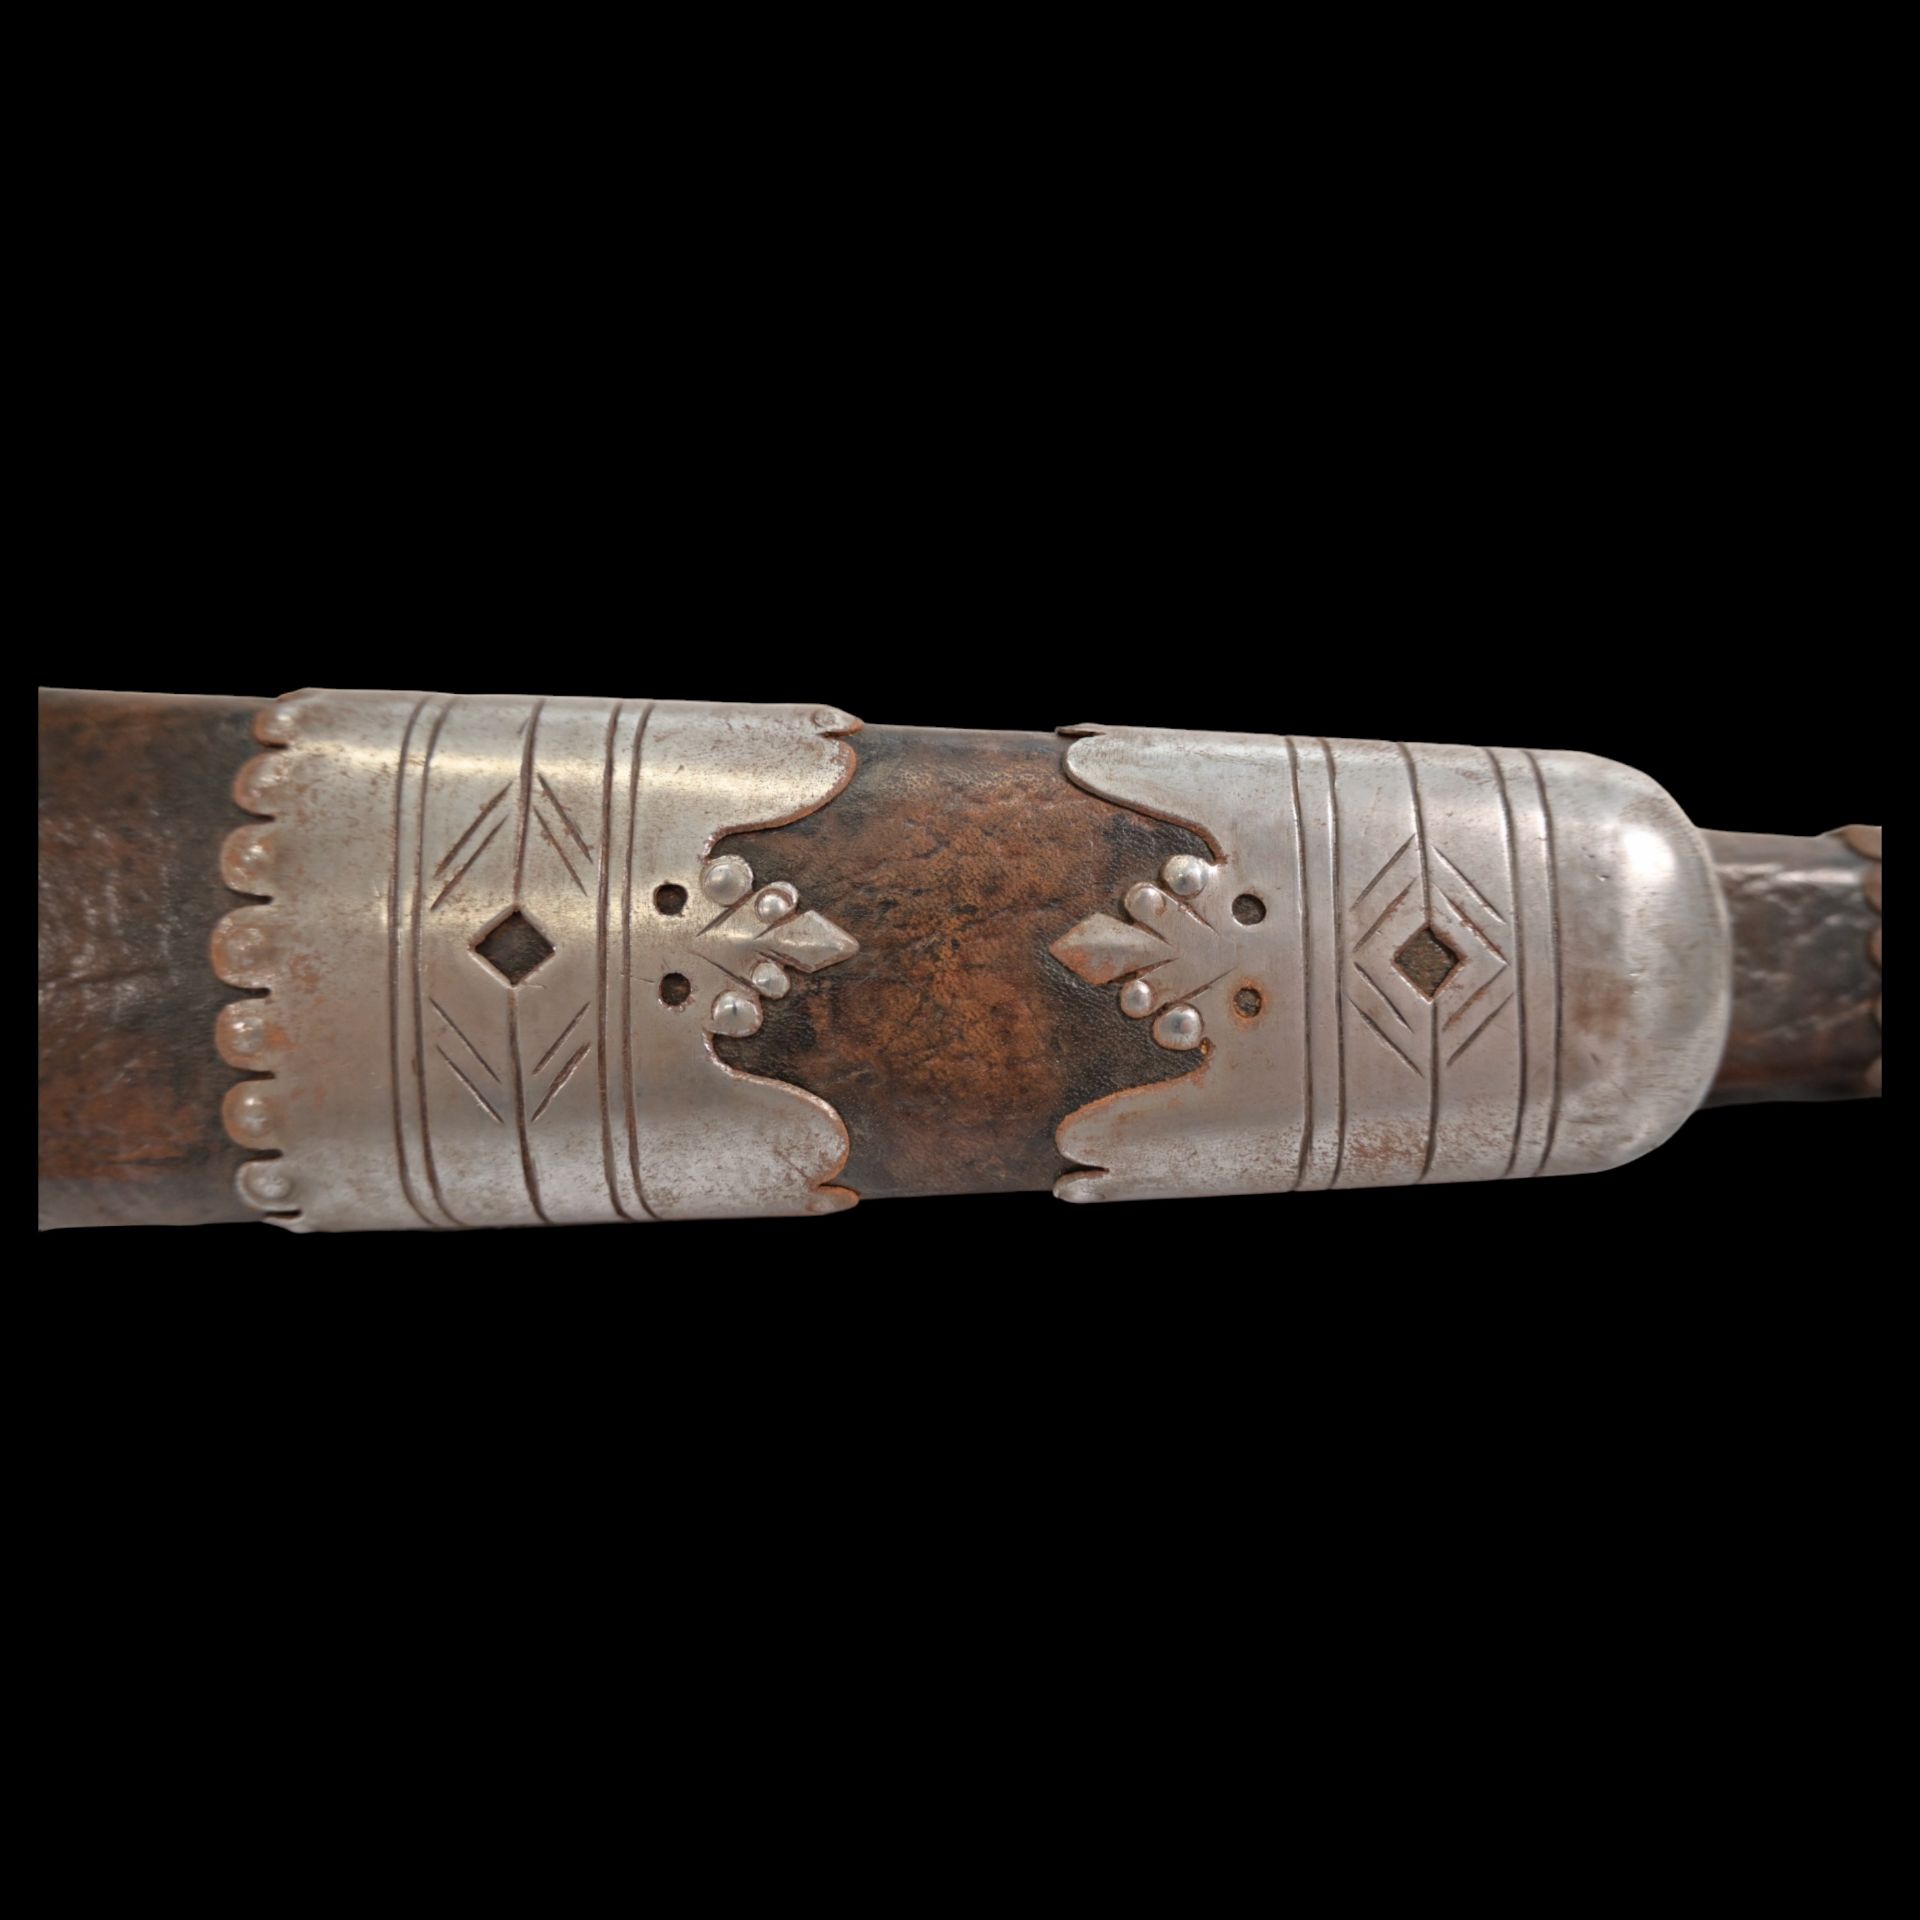 Set of French hunting cutlery from the 18th century. - Image 7 of 16